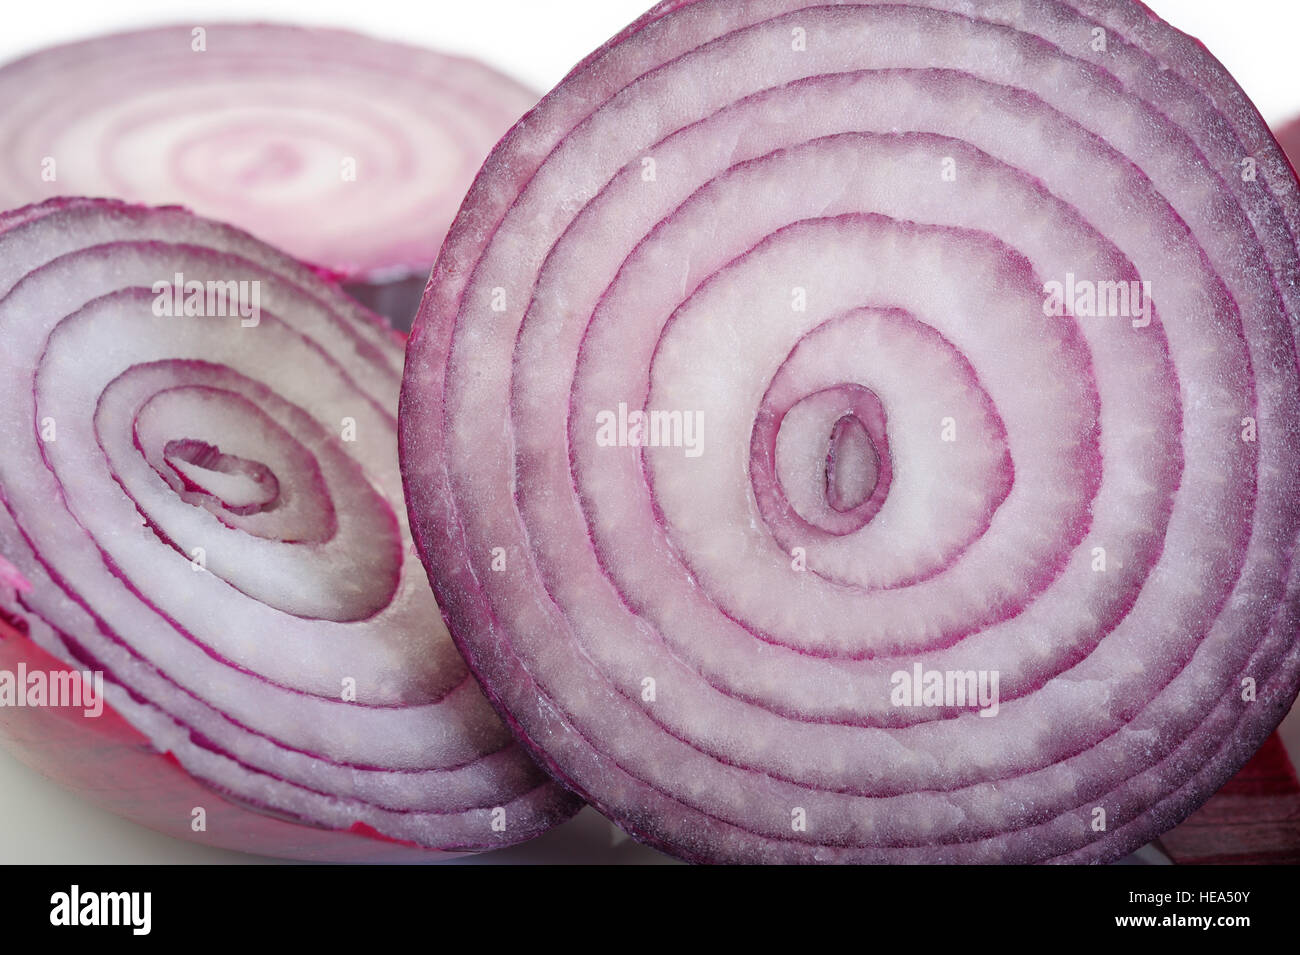 Sliced red onion Stock Photo